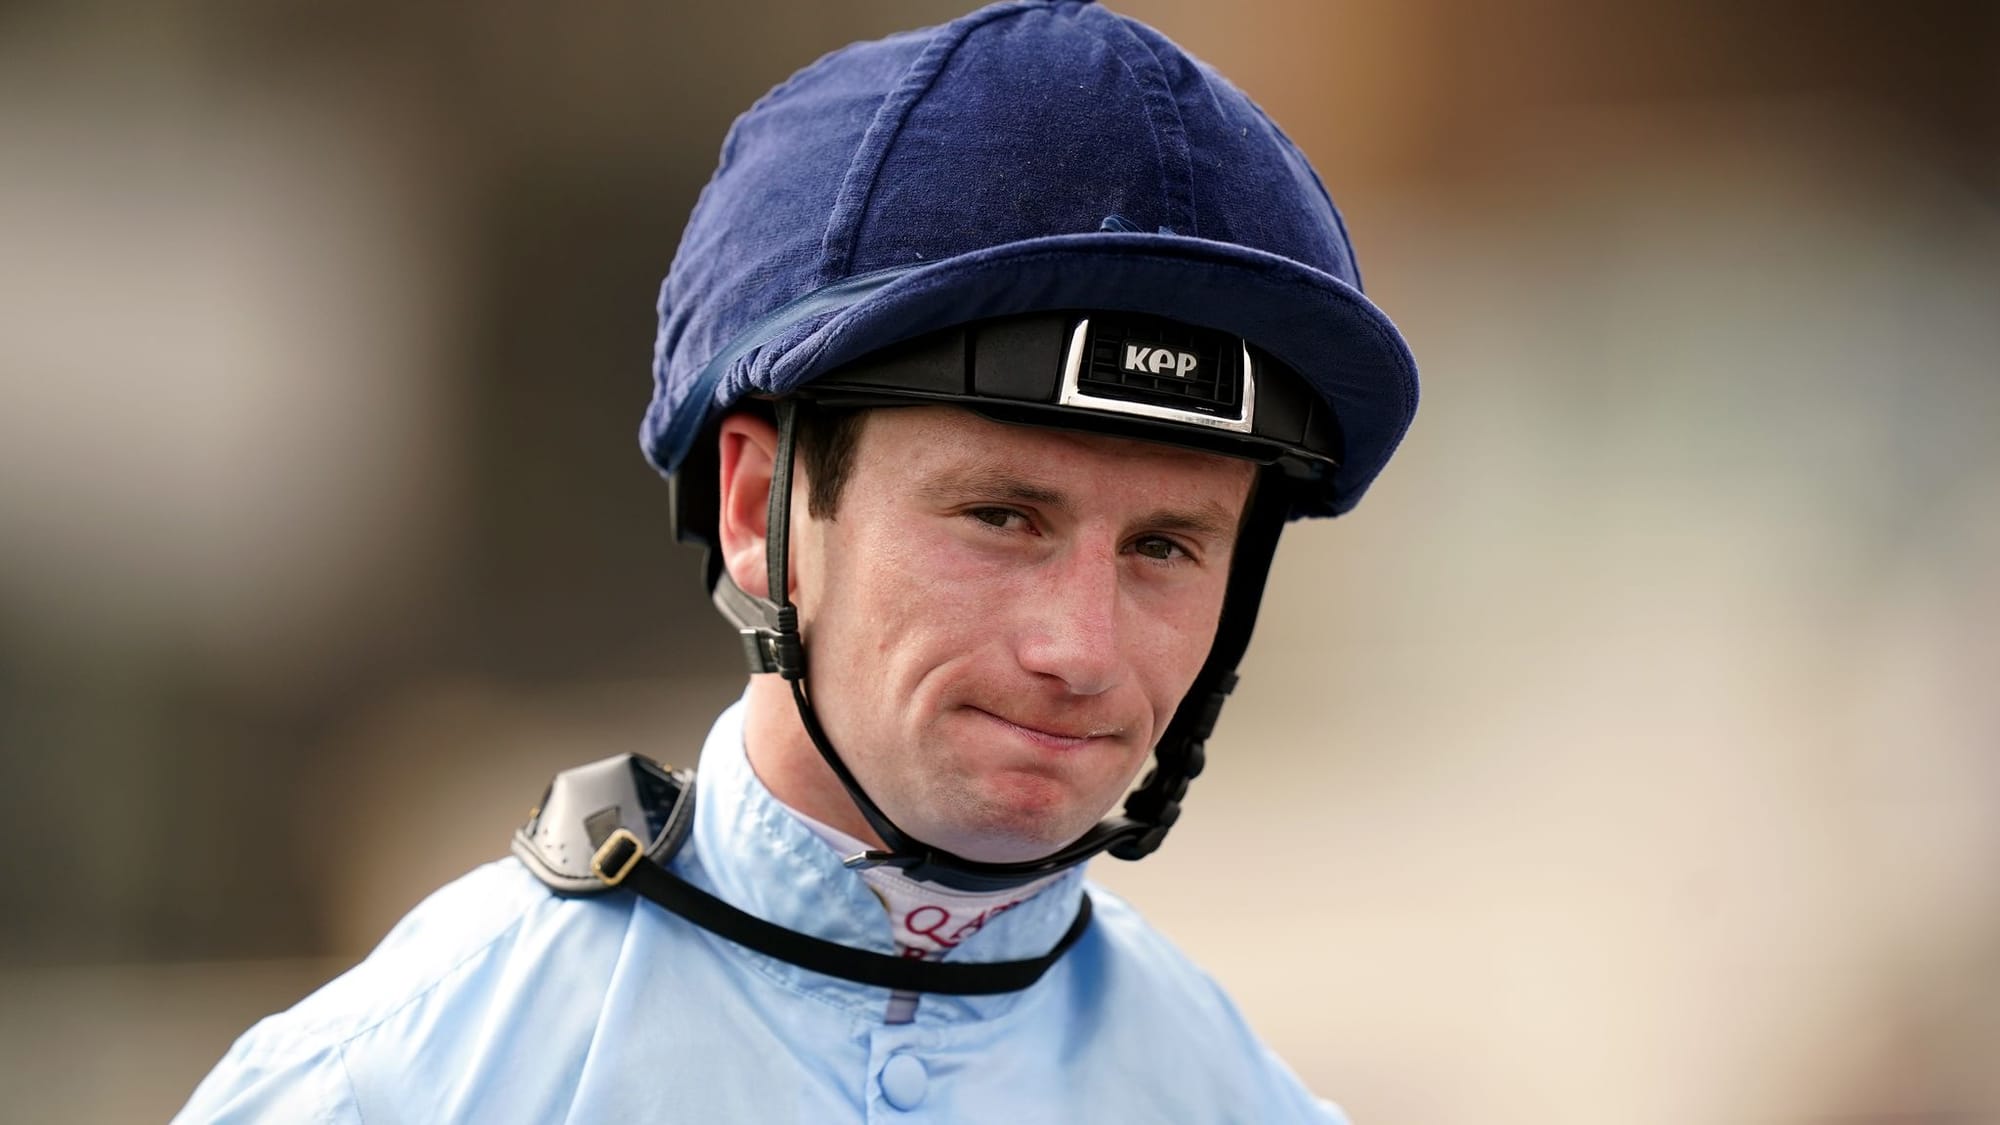 Because of his whip ban, Oisin Murphy will not be present at the Craven Meeting